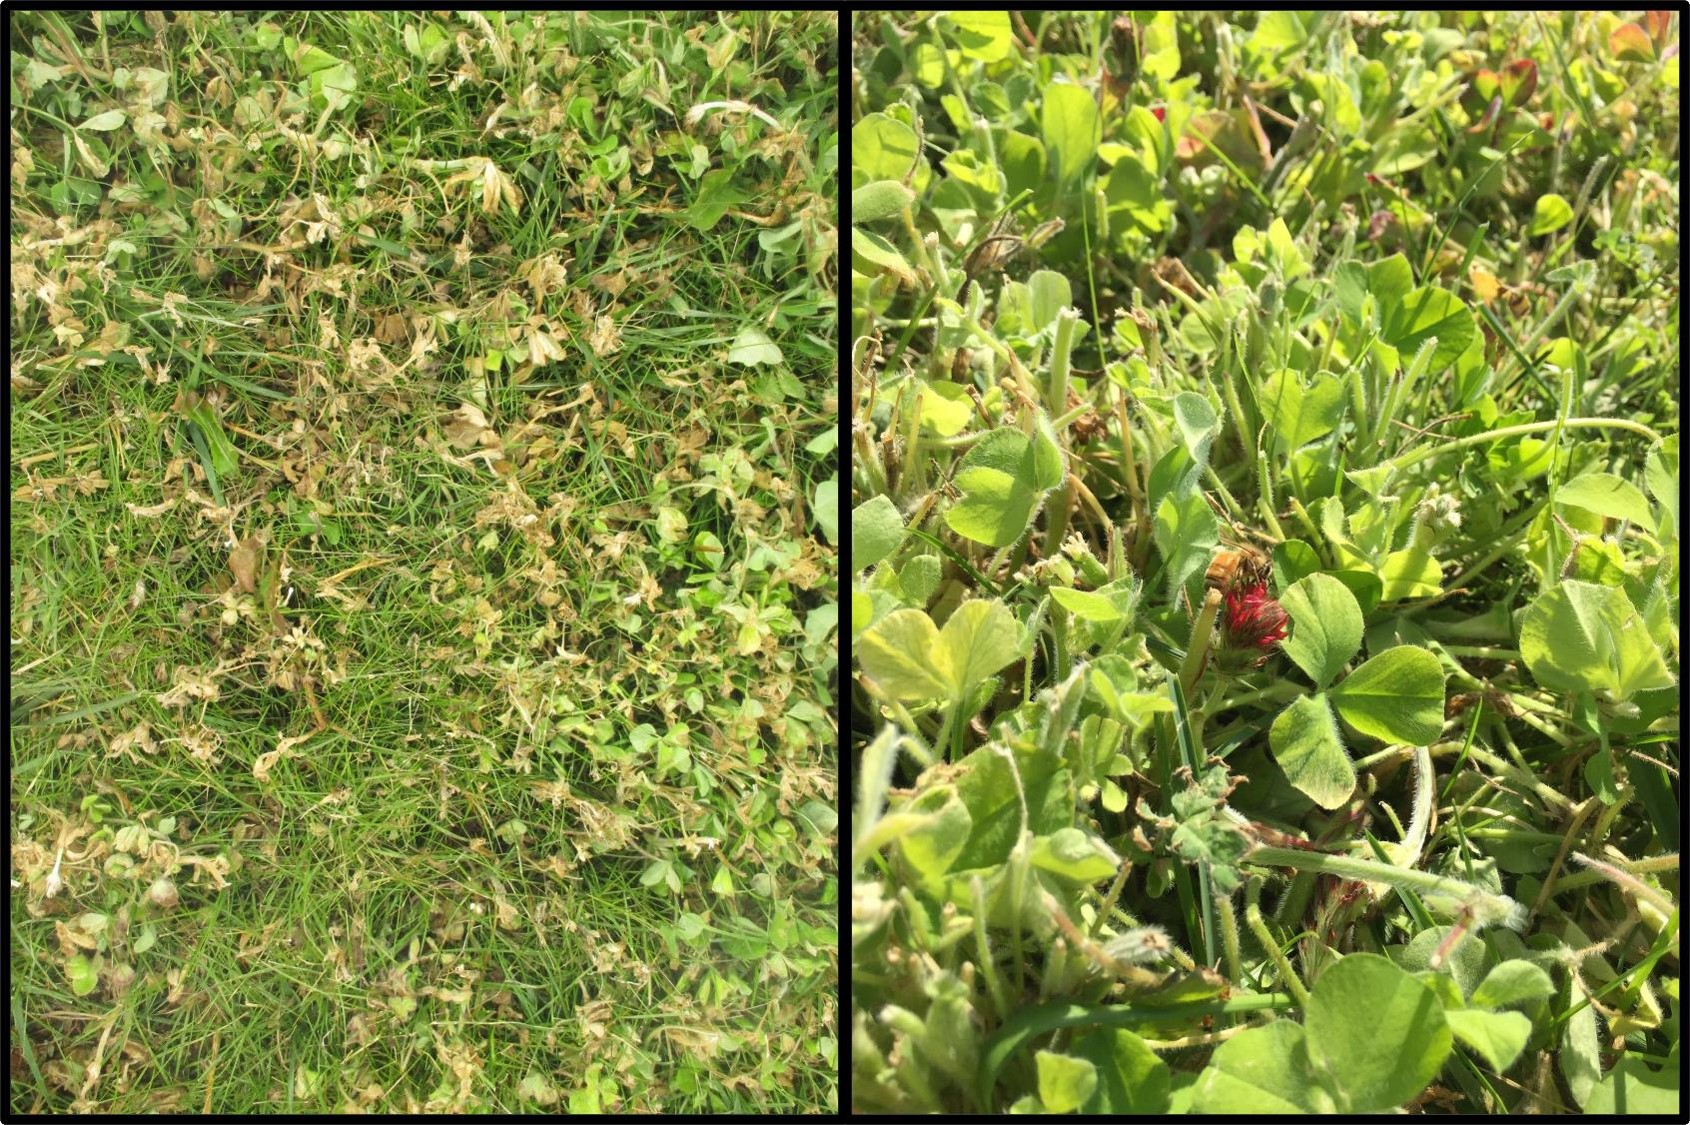 two images, the first is of turfgrass with browned clover foliage and the second is of a bee on a red clover flower